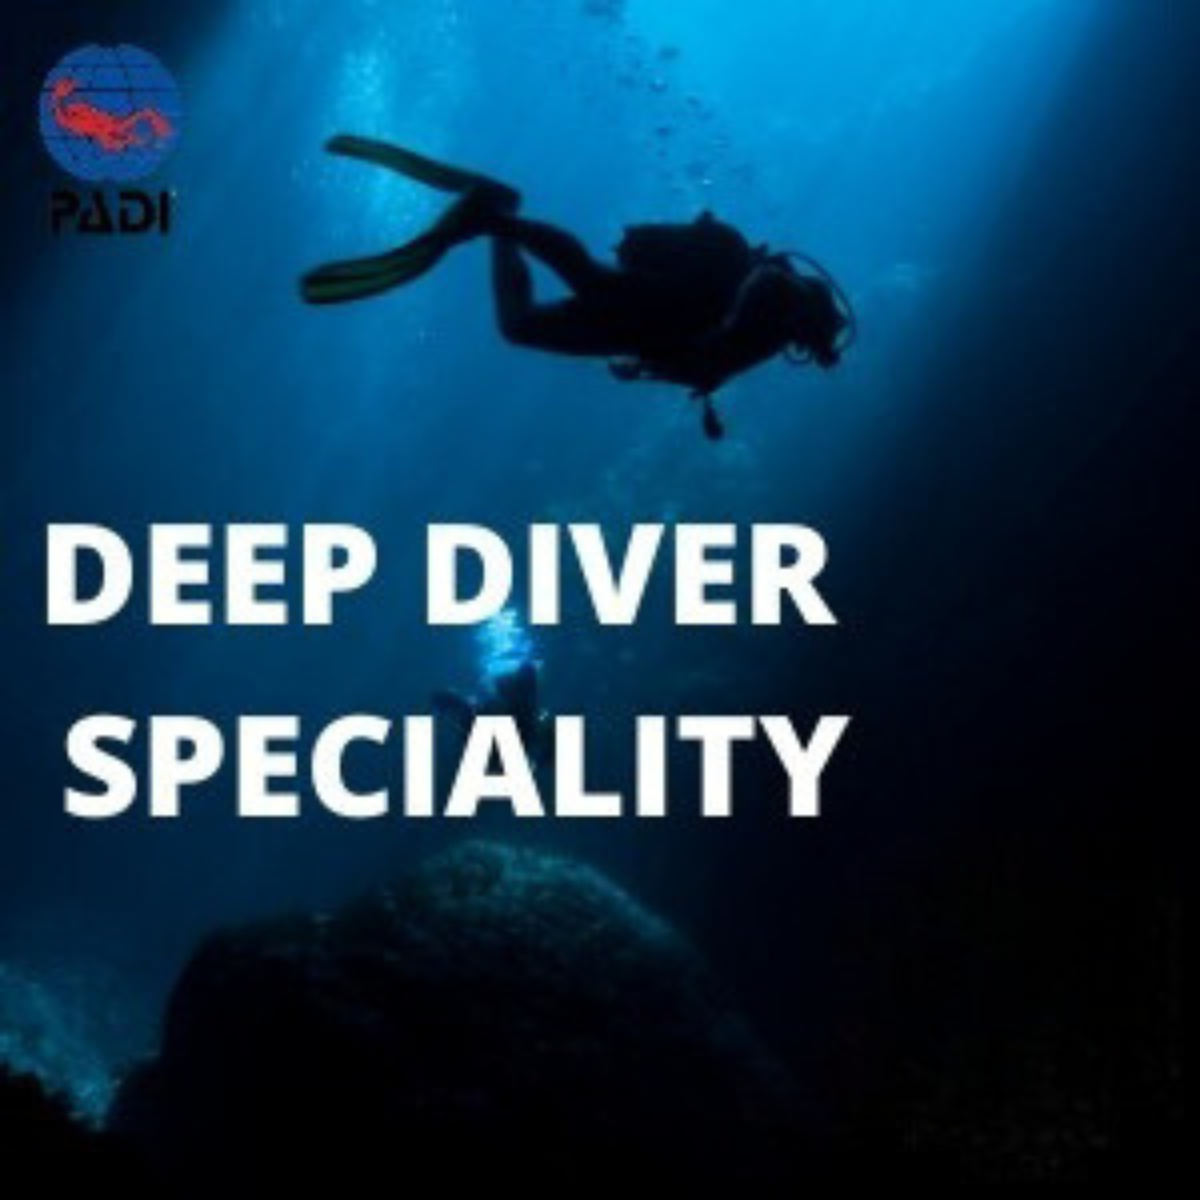 PADI Speciality Courses - Increase your knowledge